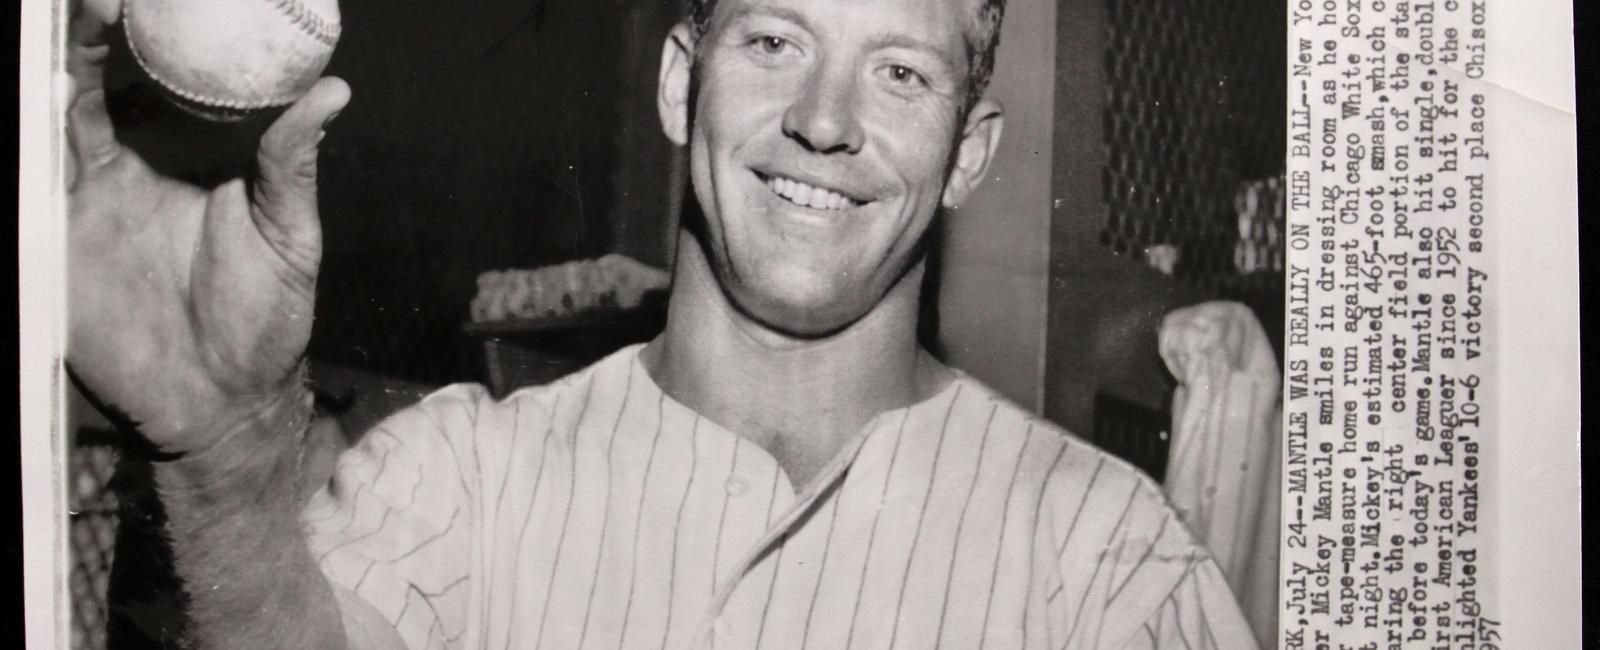 Mickey mantle was originally a shortstop but after making 102 errors in his last two seasons in the minors he was moved to the outfield